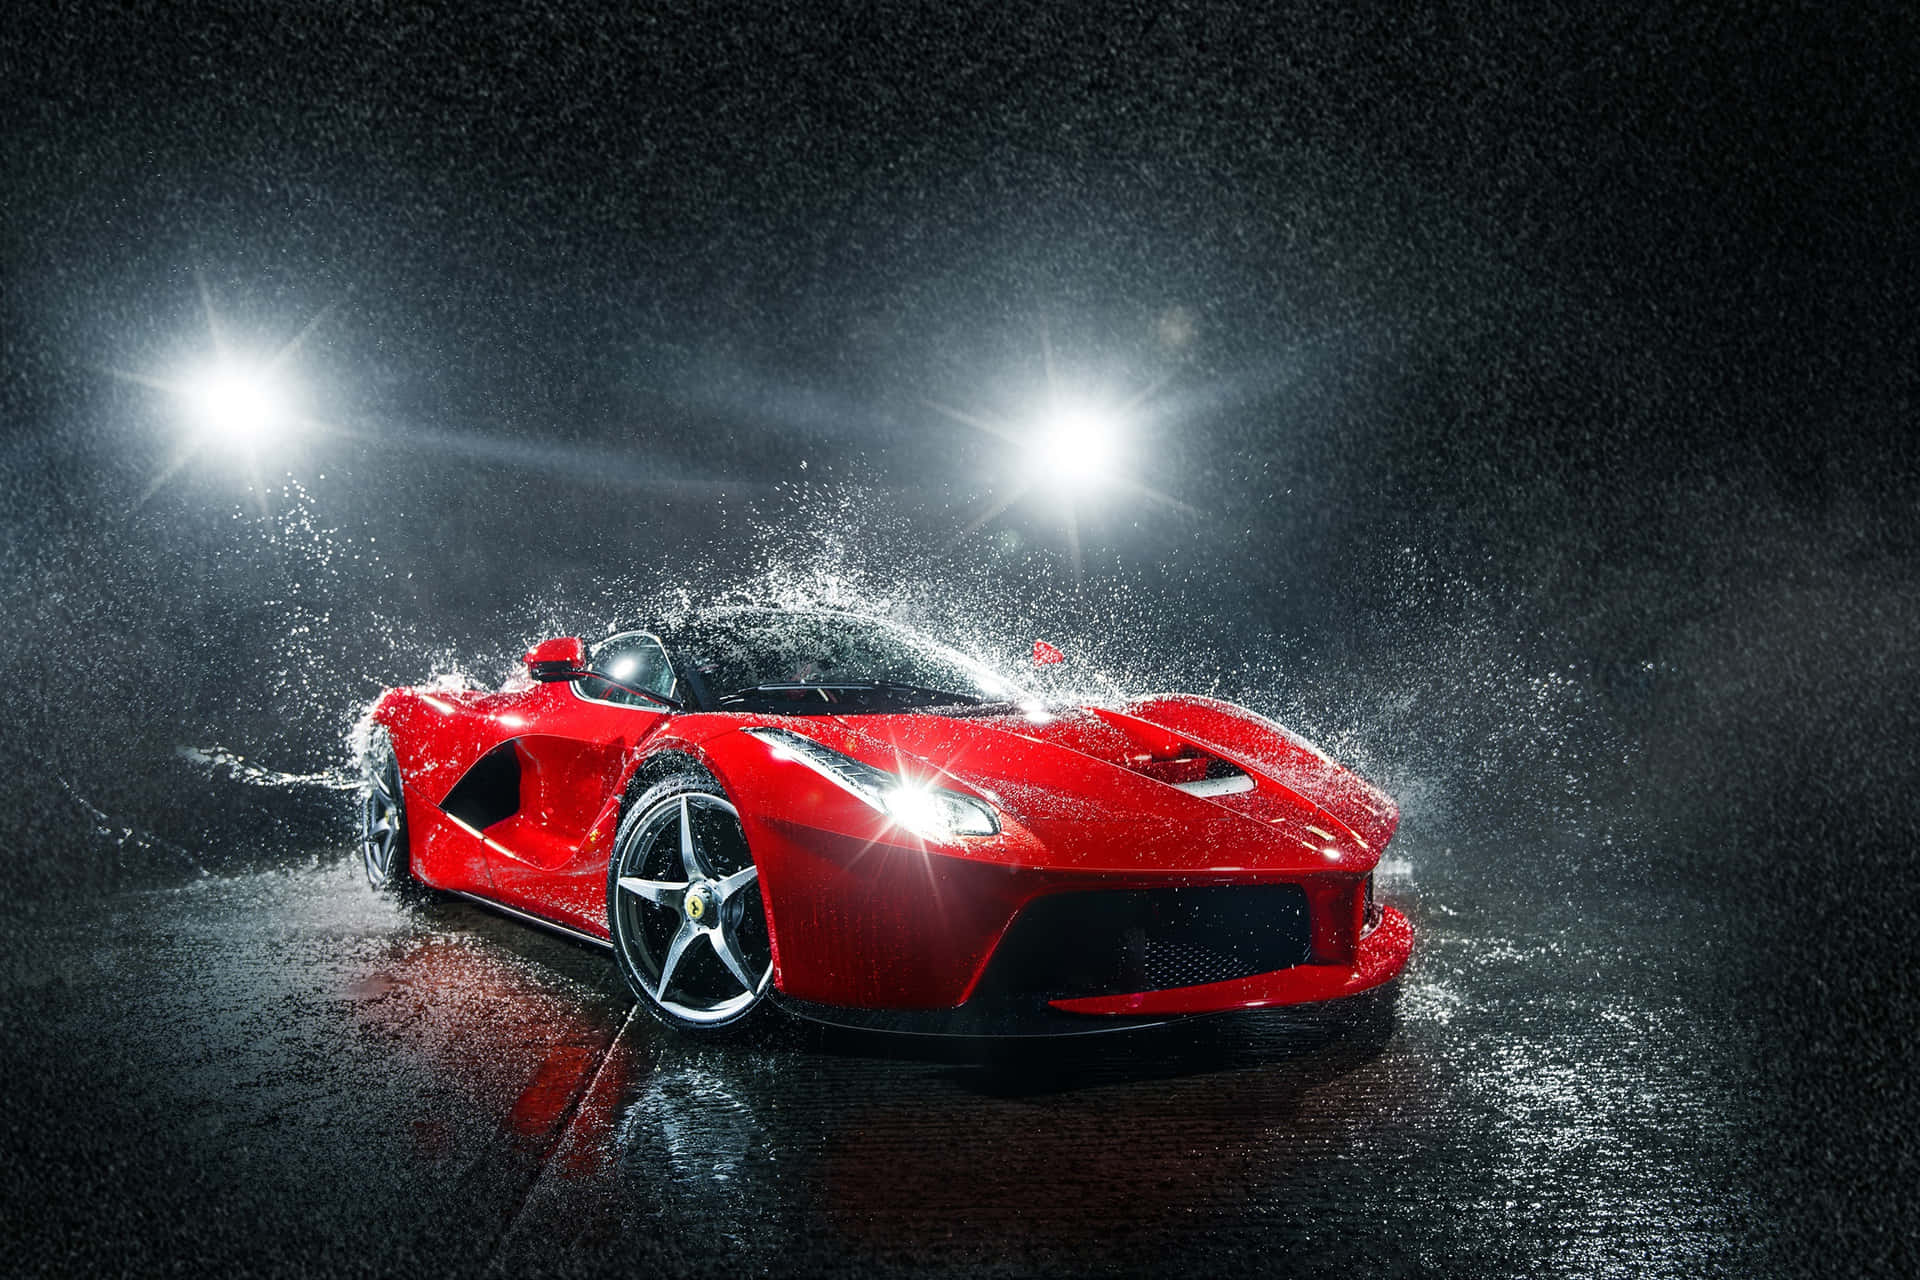 Caption: Red Car Experiencing Top-notch Detailing In Rain Wallpaper